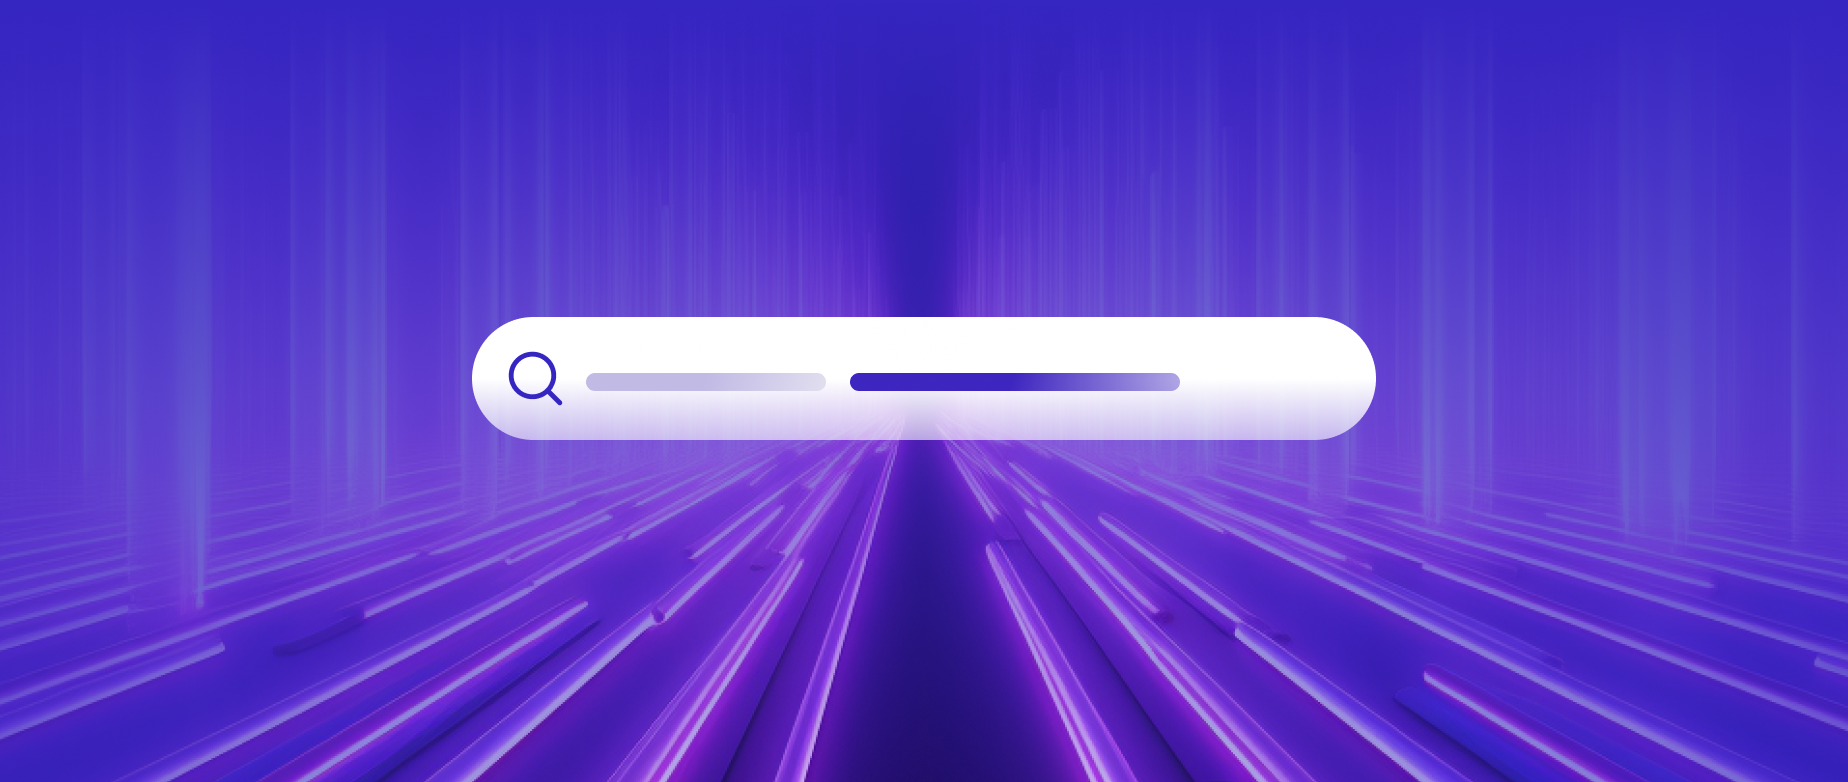 A search bar on a purple background with long purple lights.